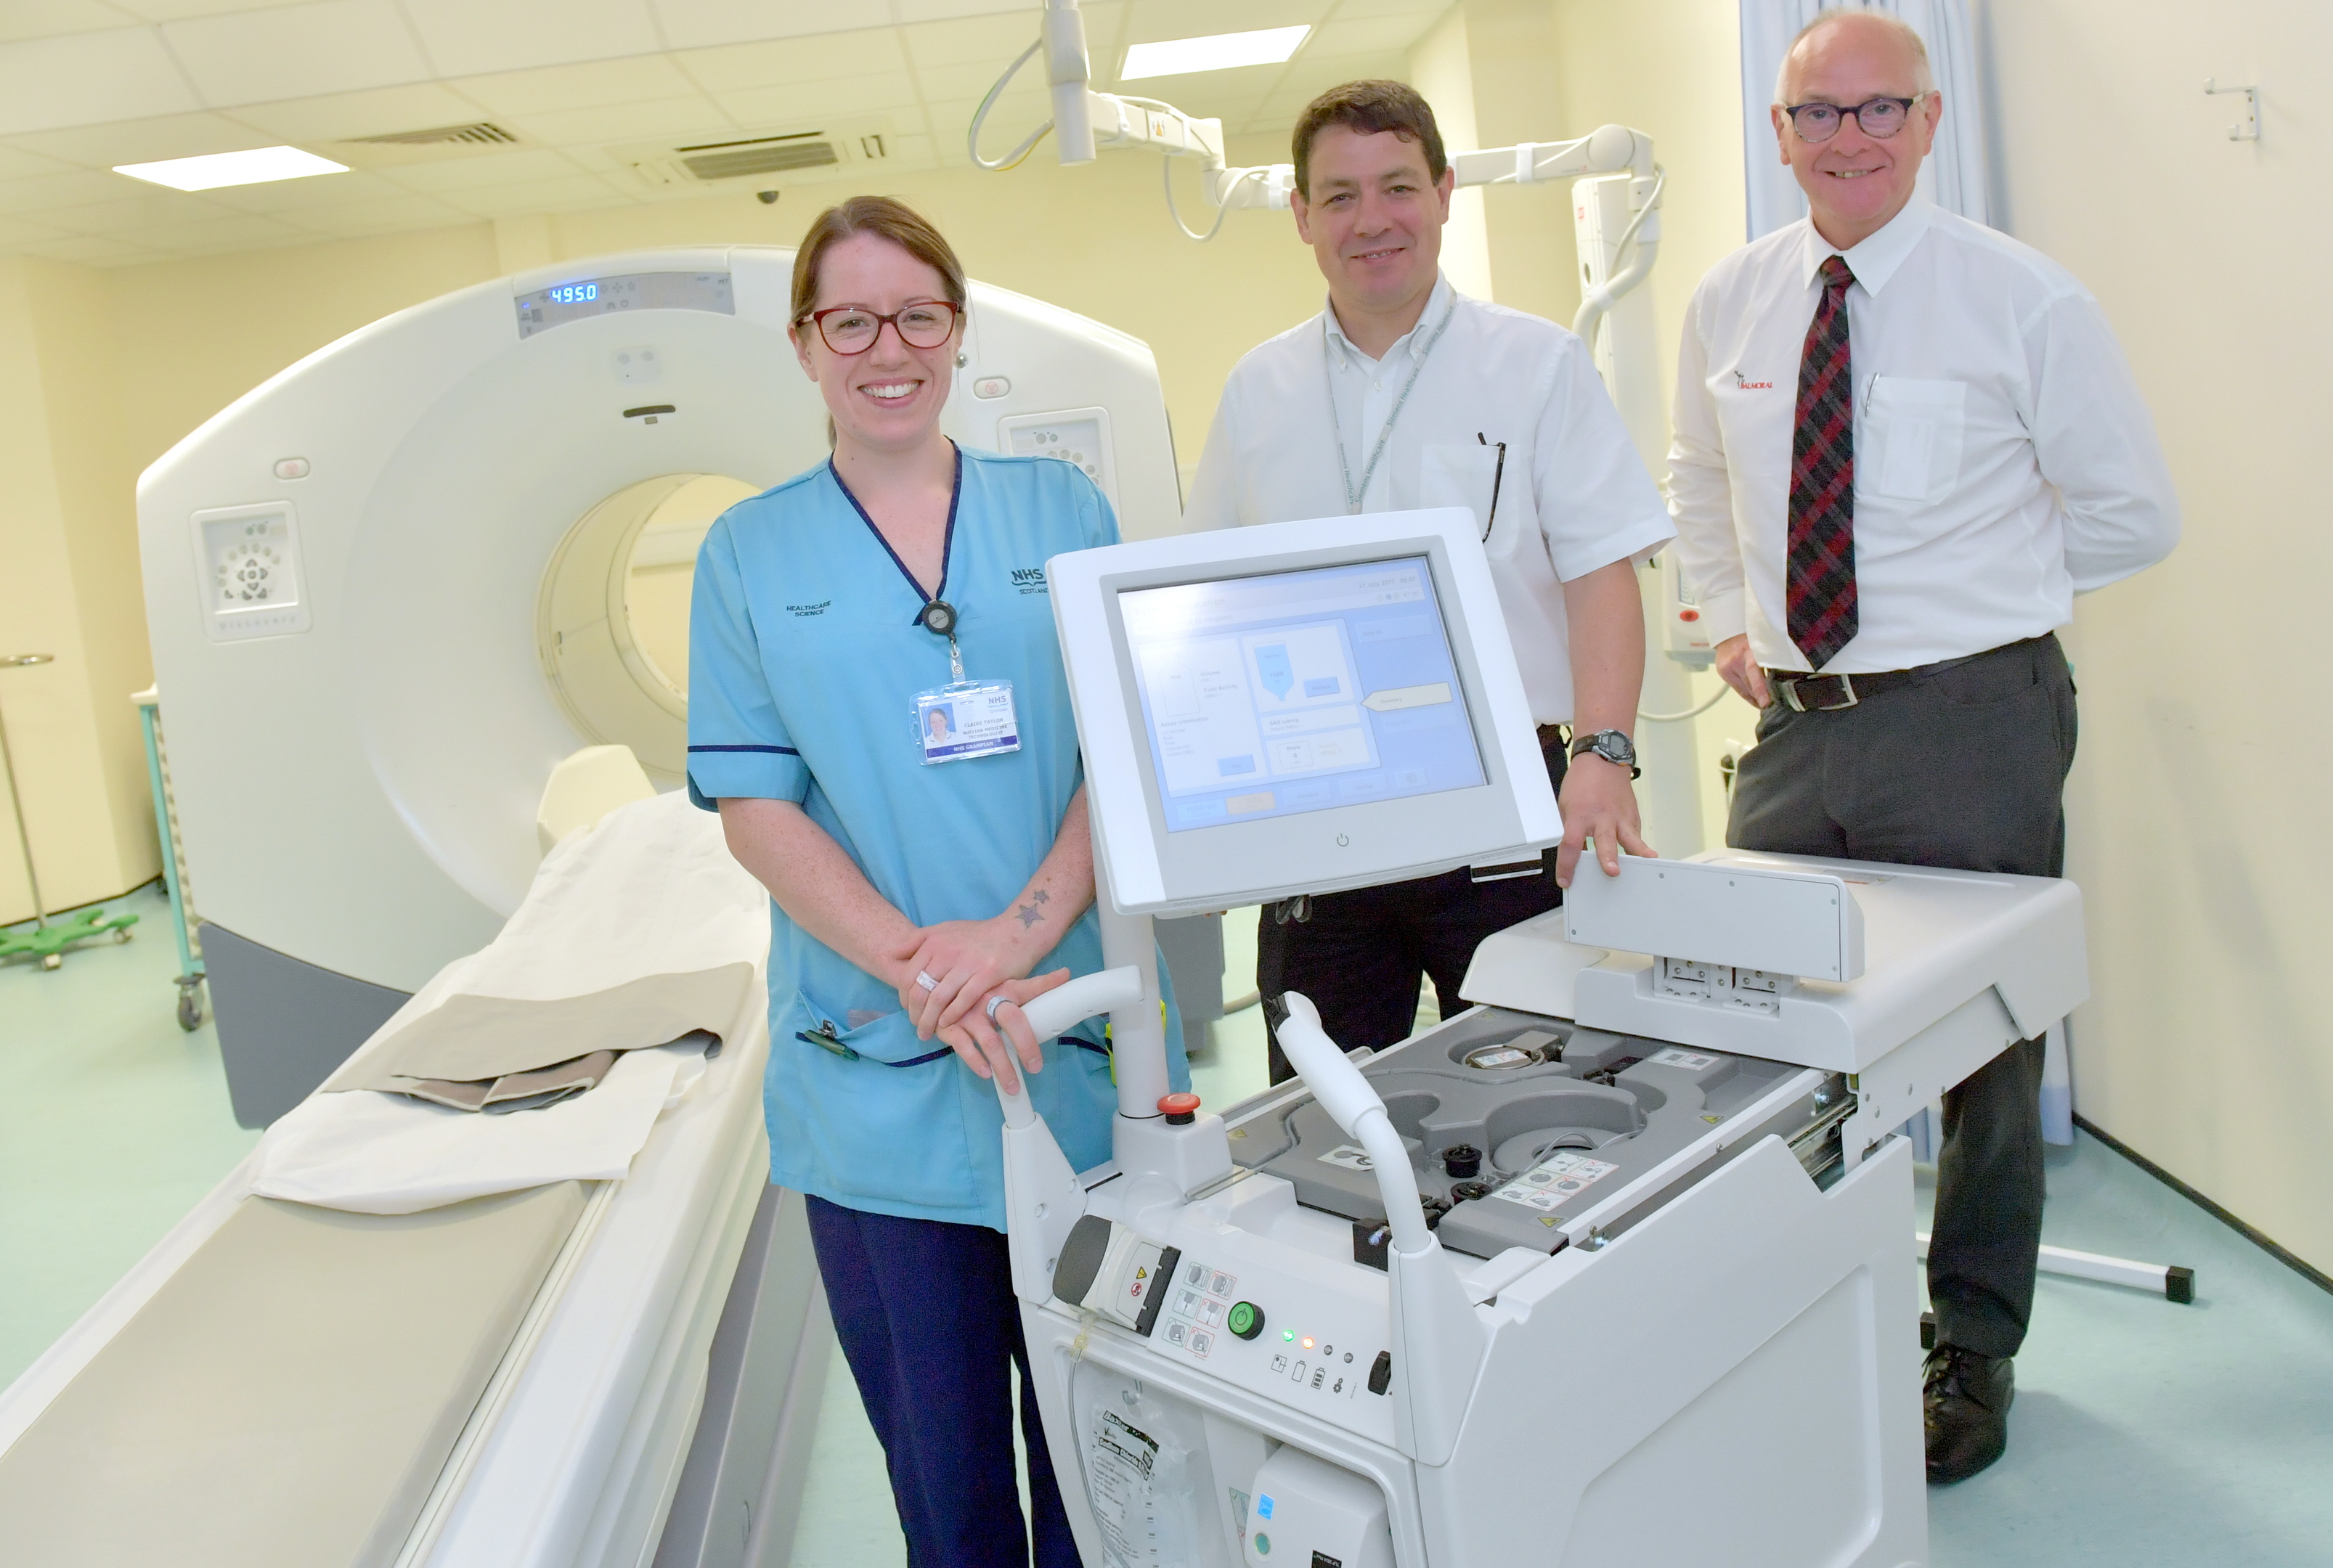 Pictured - L-R Nuclear Medicine Technologist Claire Taylor, Dr Roger Staff and Steve Gibb of Friends of Anchor with the new machine.   
Picture by Kami Thomson